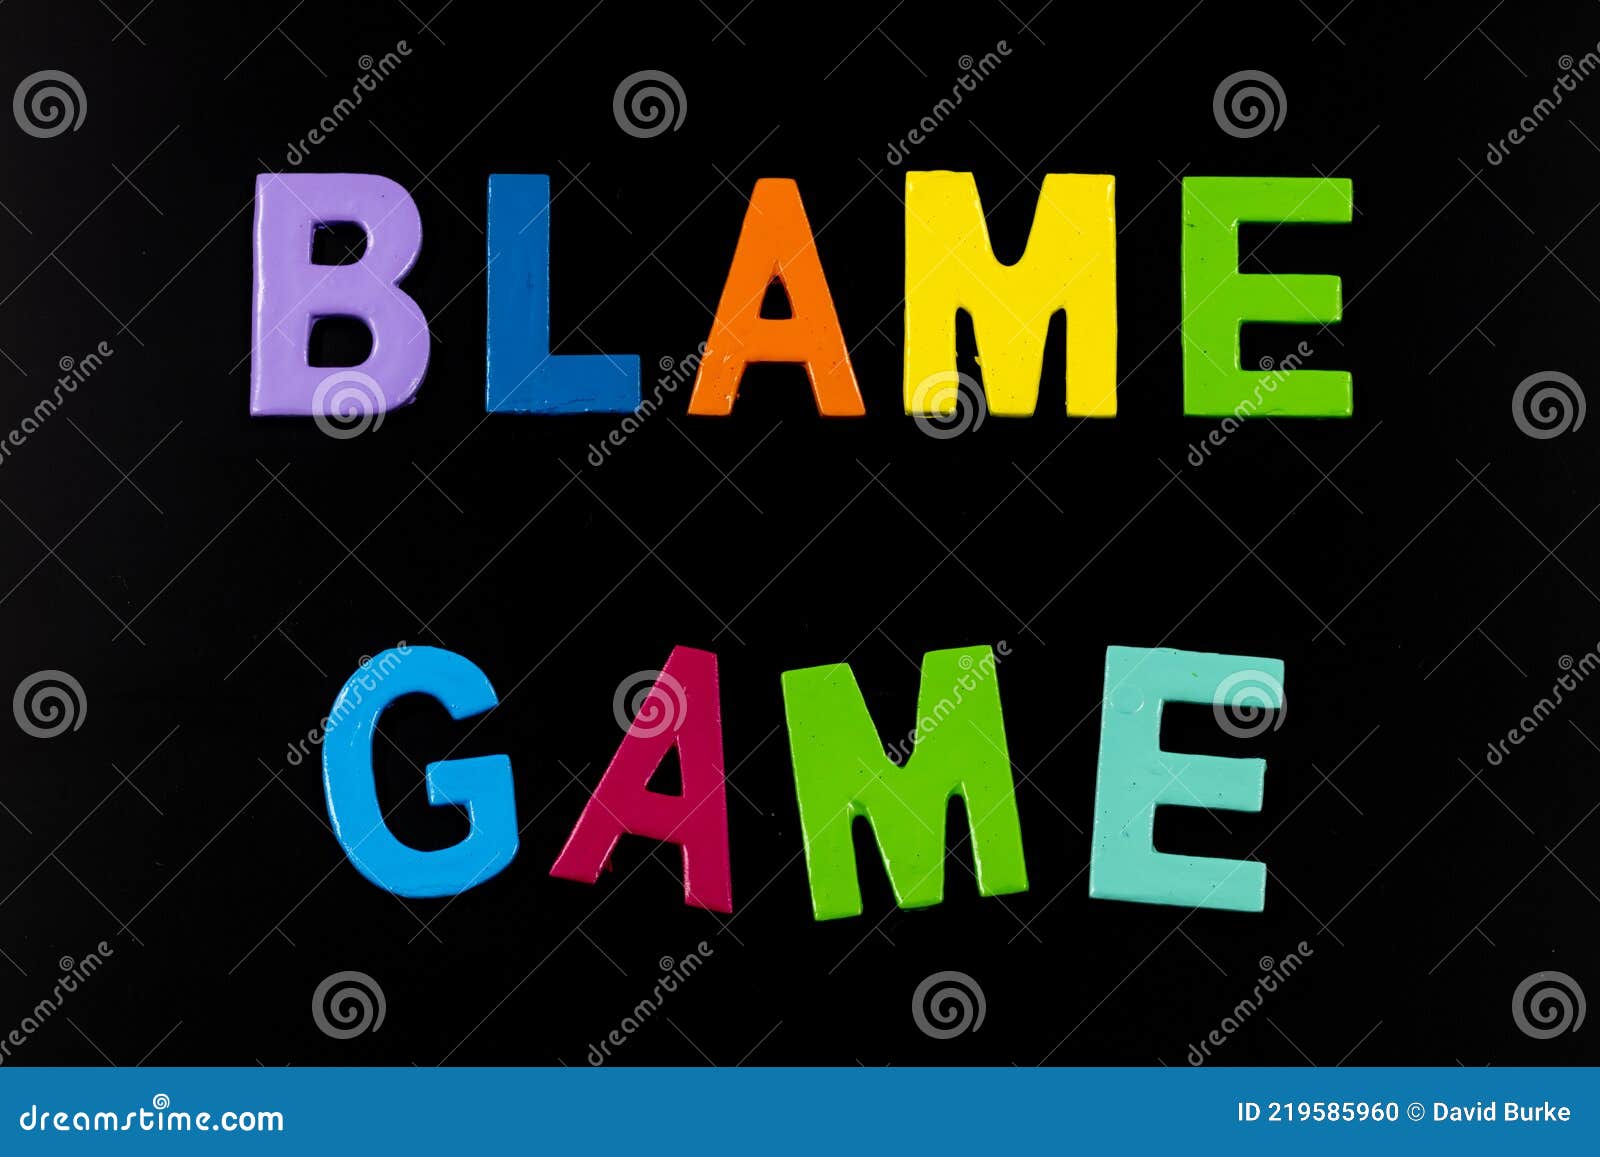 blame game accusation fault accuse condemn charge guilt